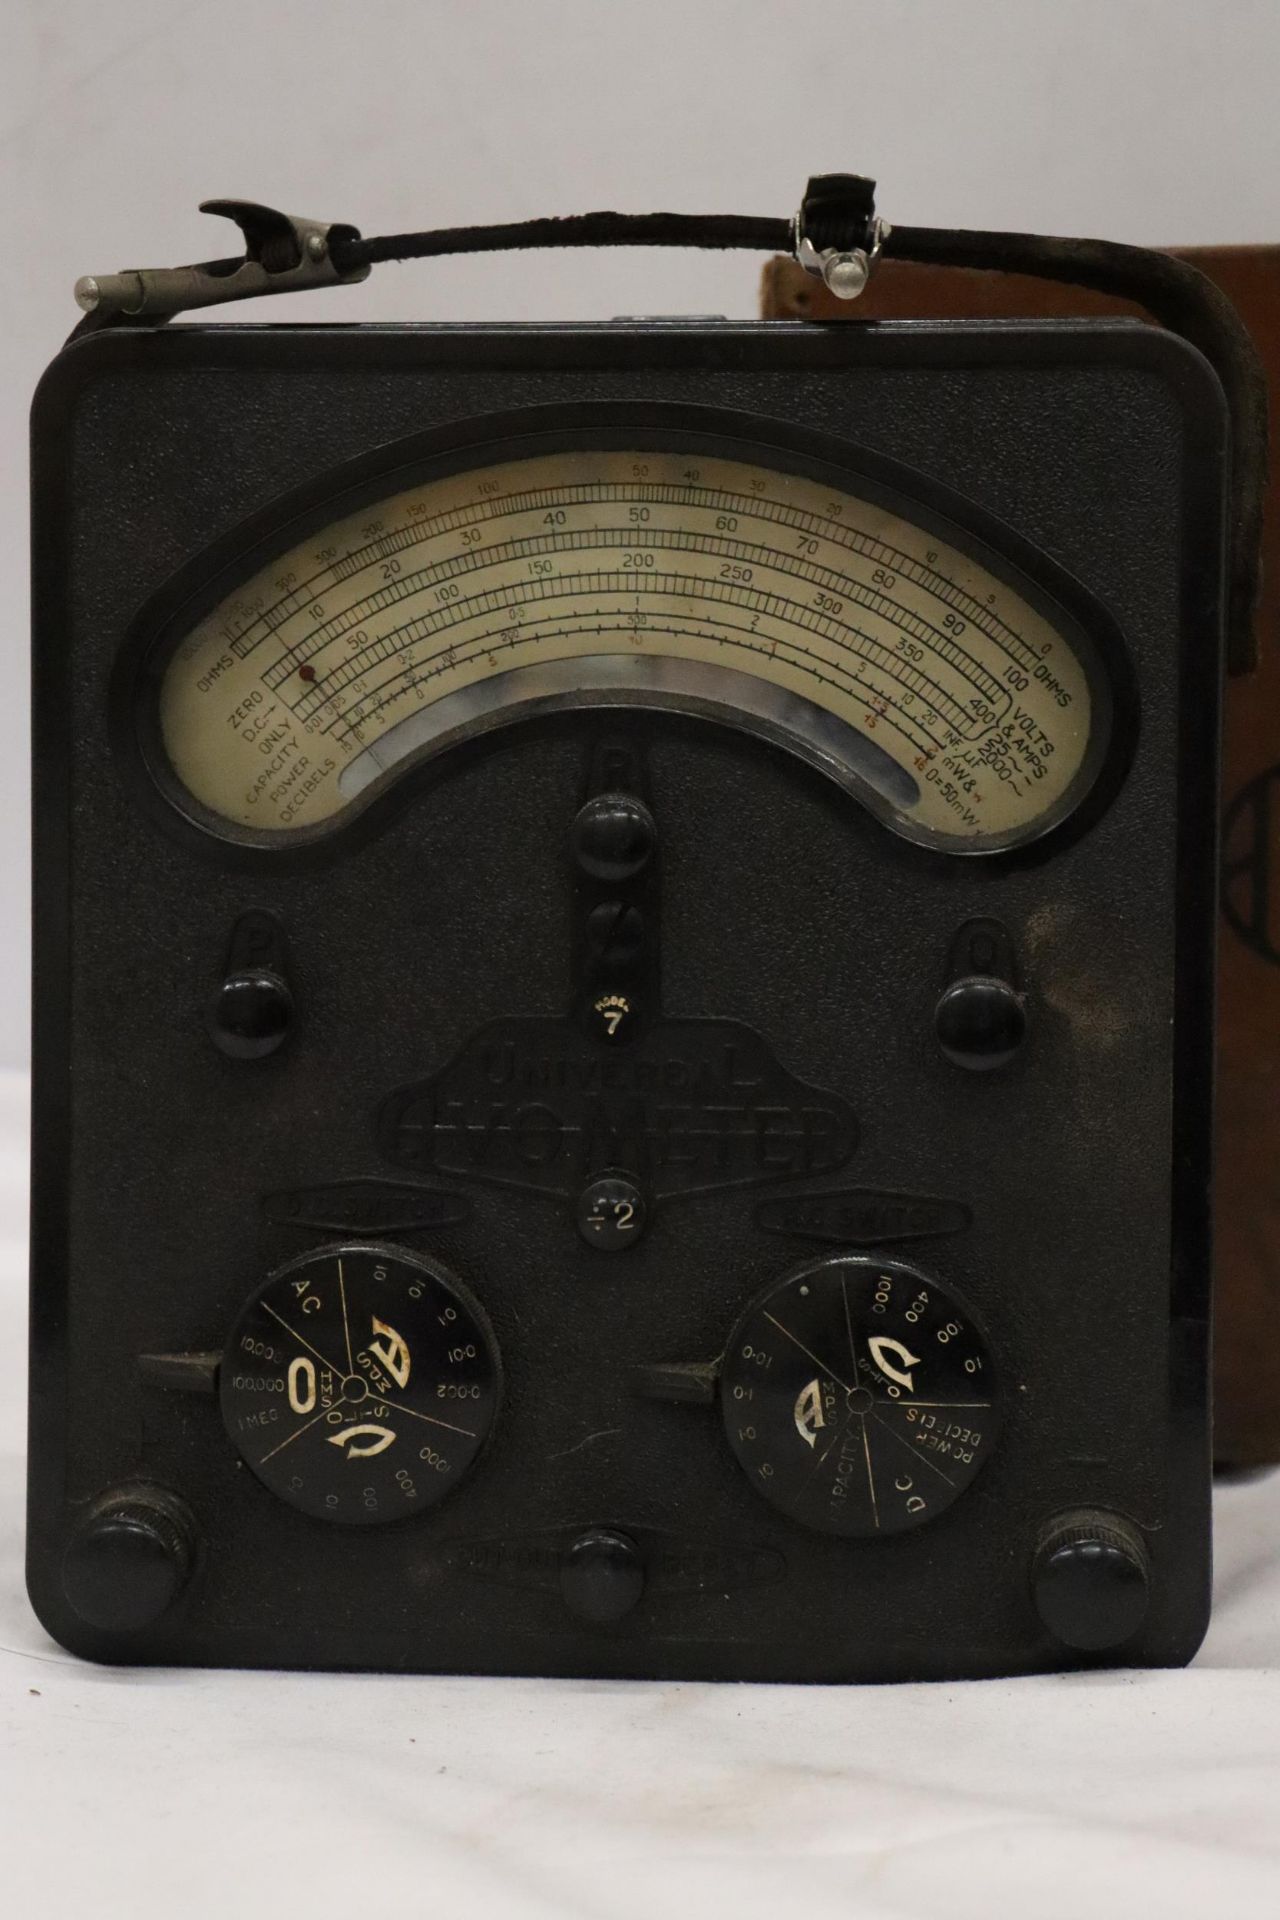 A LARGE BAKELITE AVOMETER IN LEATHER CASE - Image 6 of 6